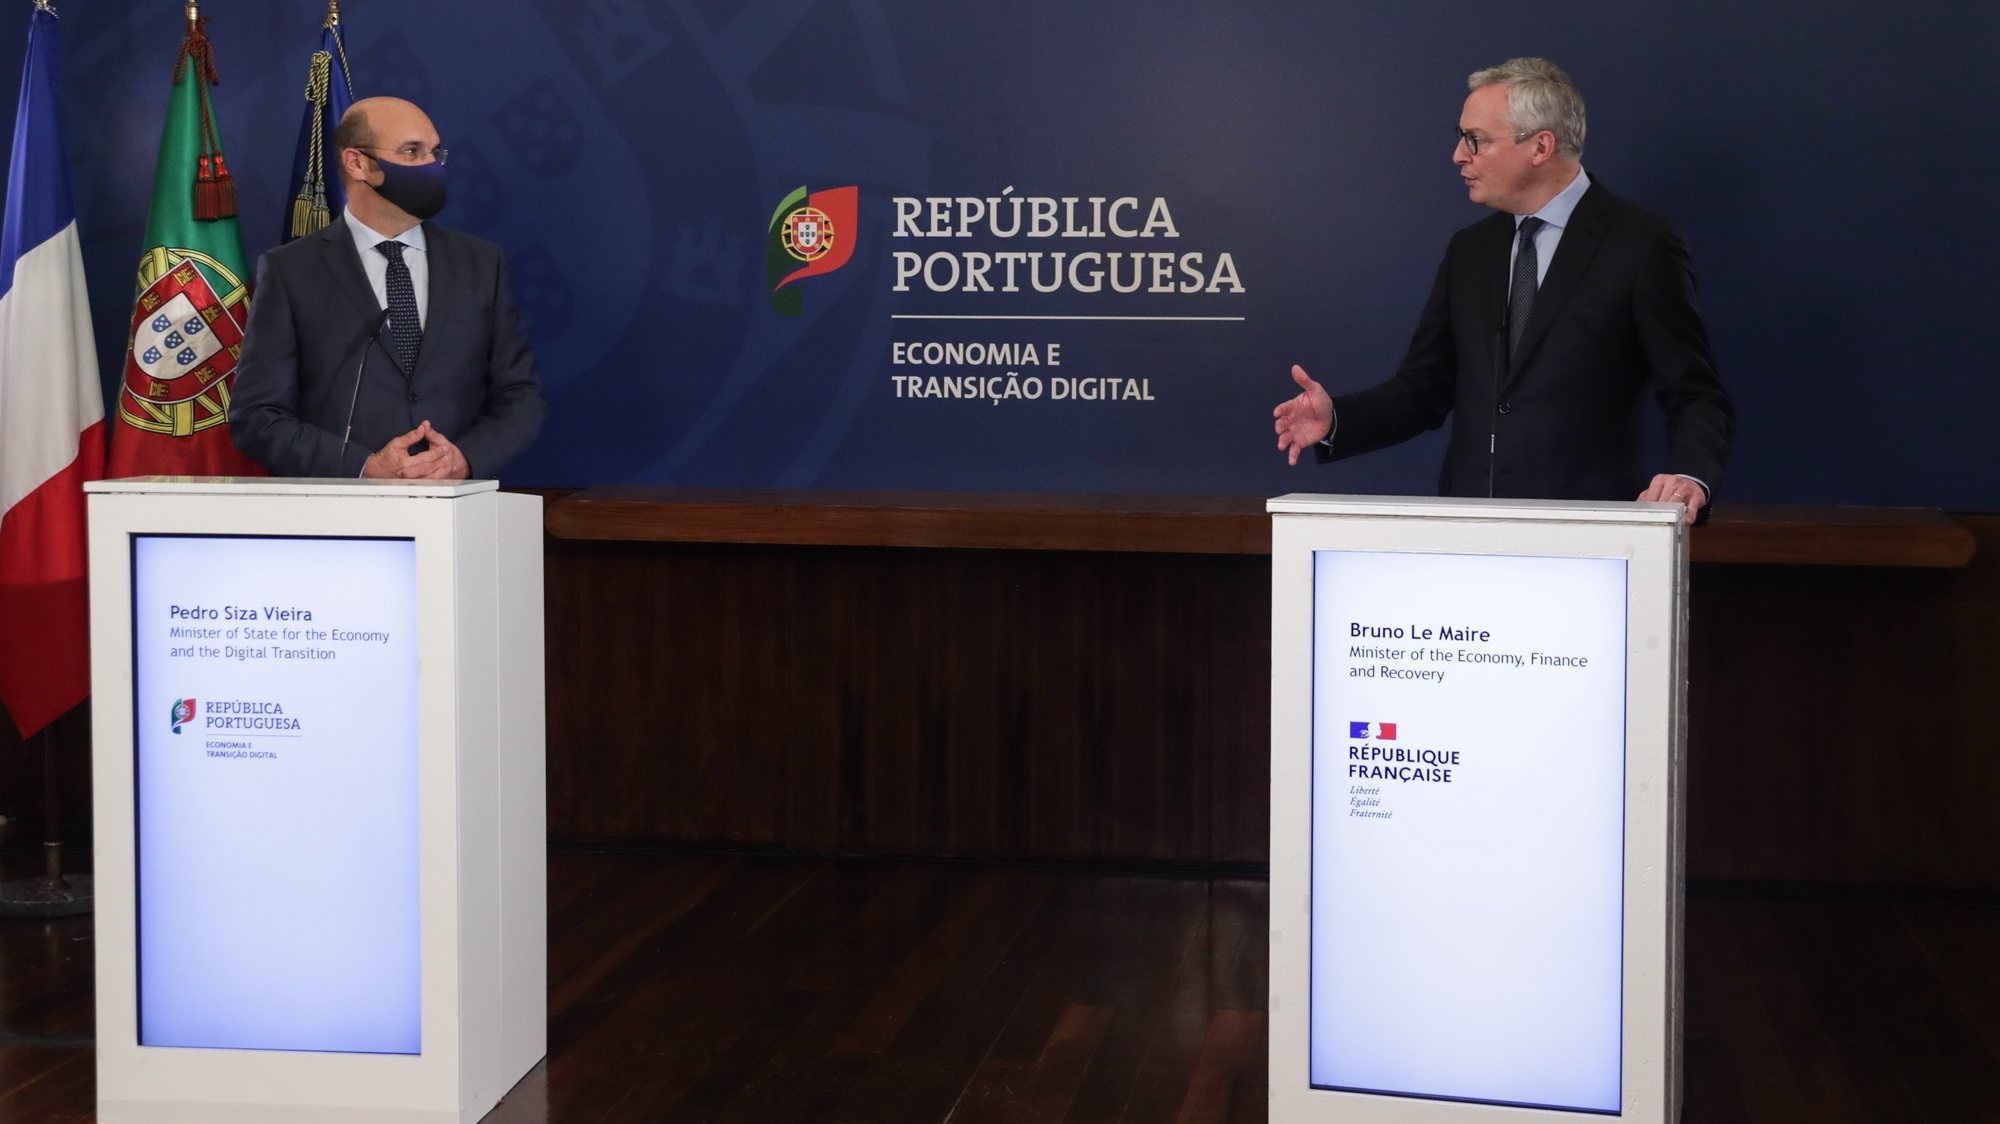 Portuguese Economy minister Pedro Siza Vieira (L) together with his french counterpart Bruno Le Maire (R) during the press conference after their meeting at the Economy Ministry in downtown Lisbon, Portugal, 02nd November 2020. TIAGO PETINGA/LUSA